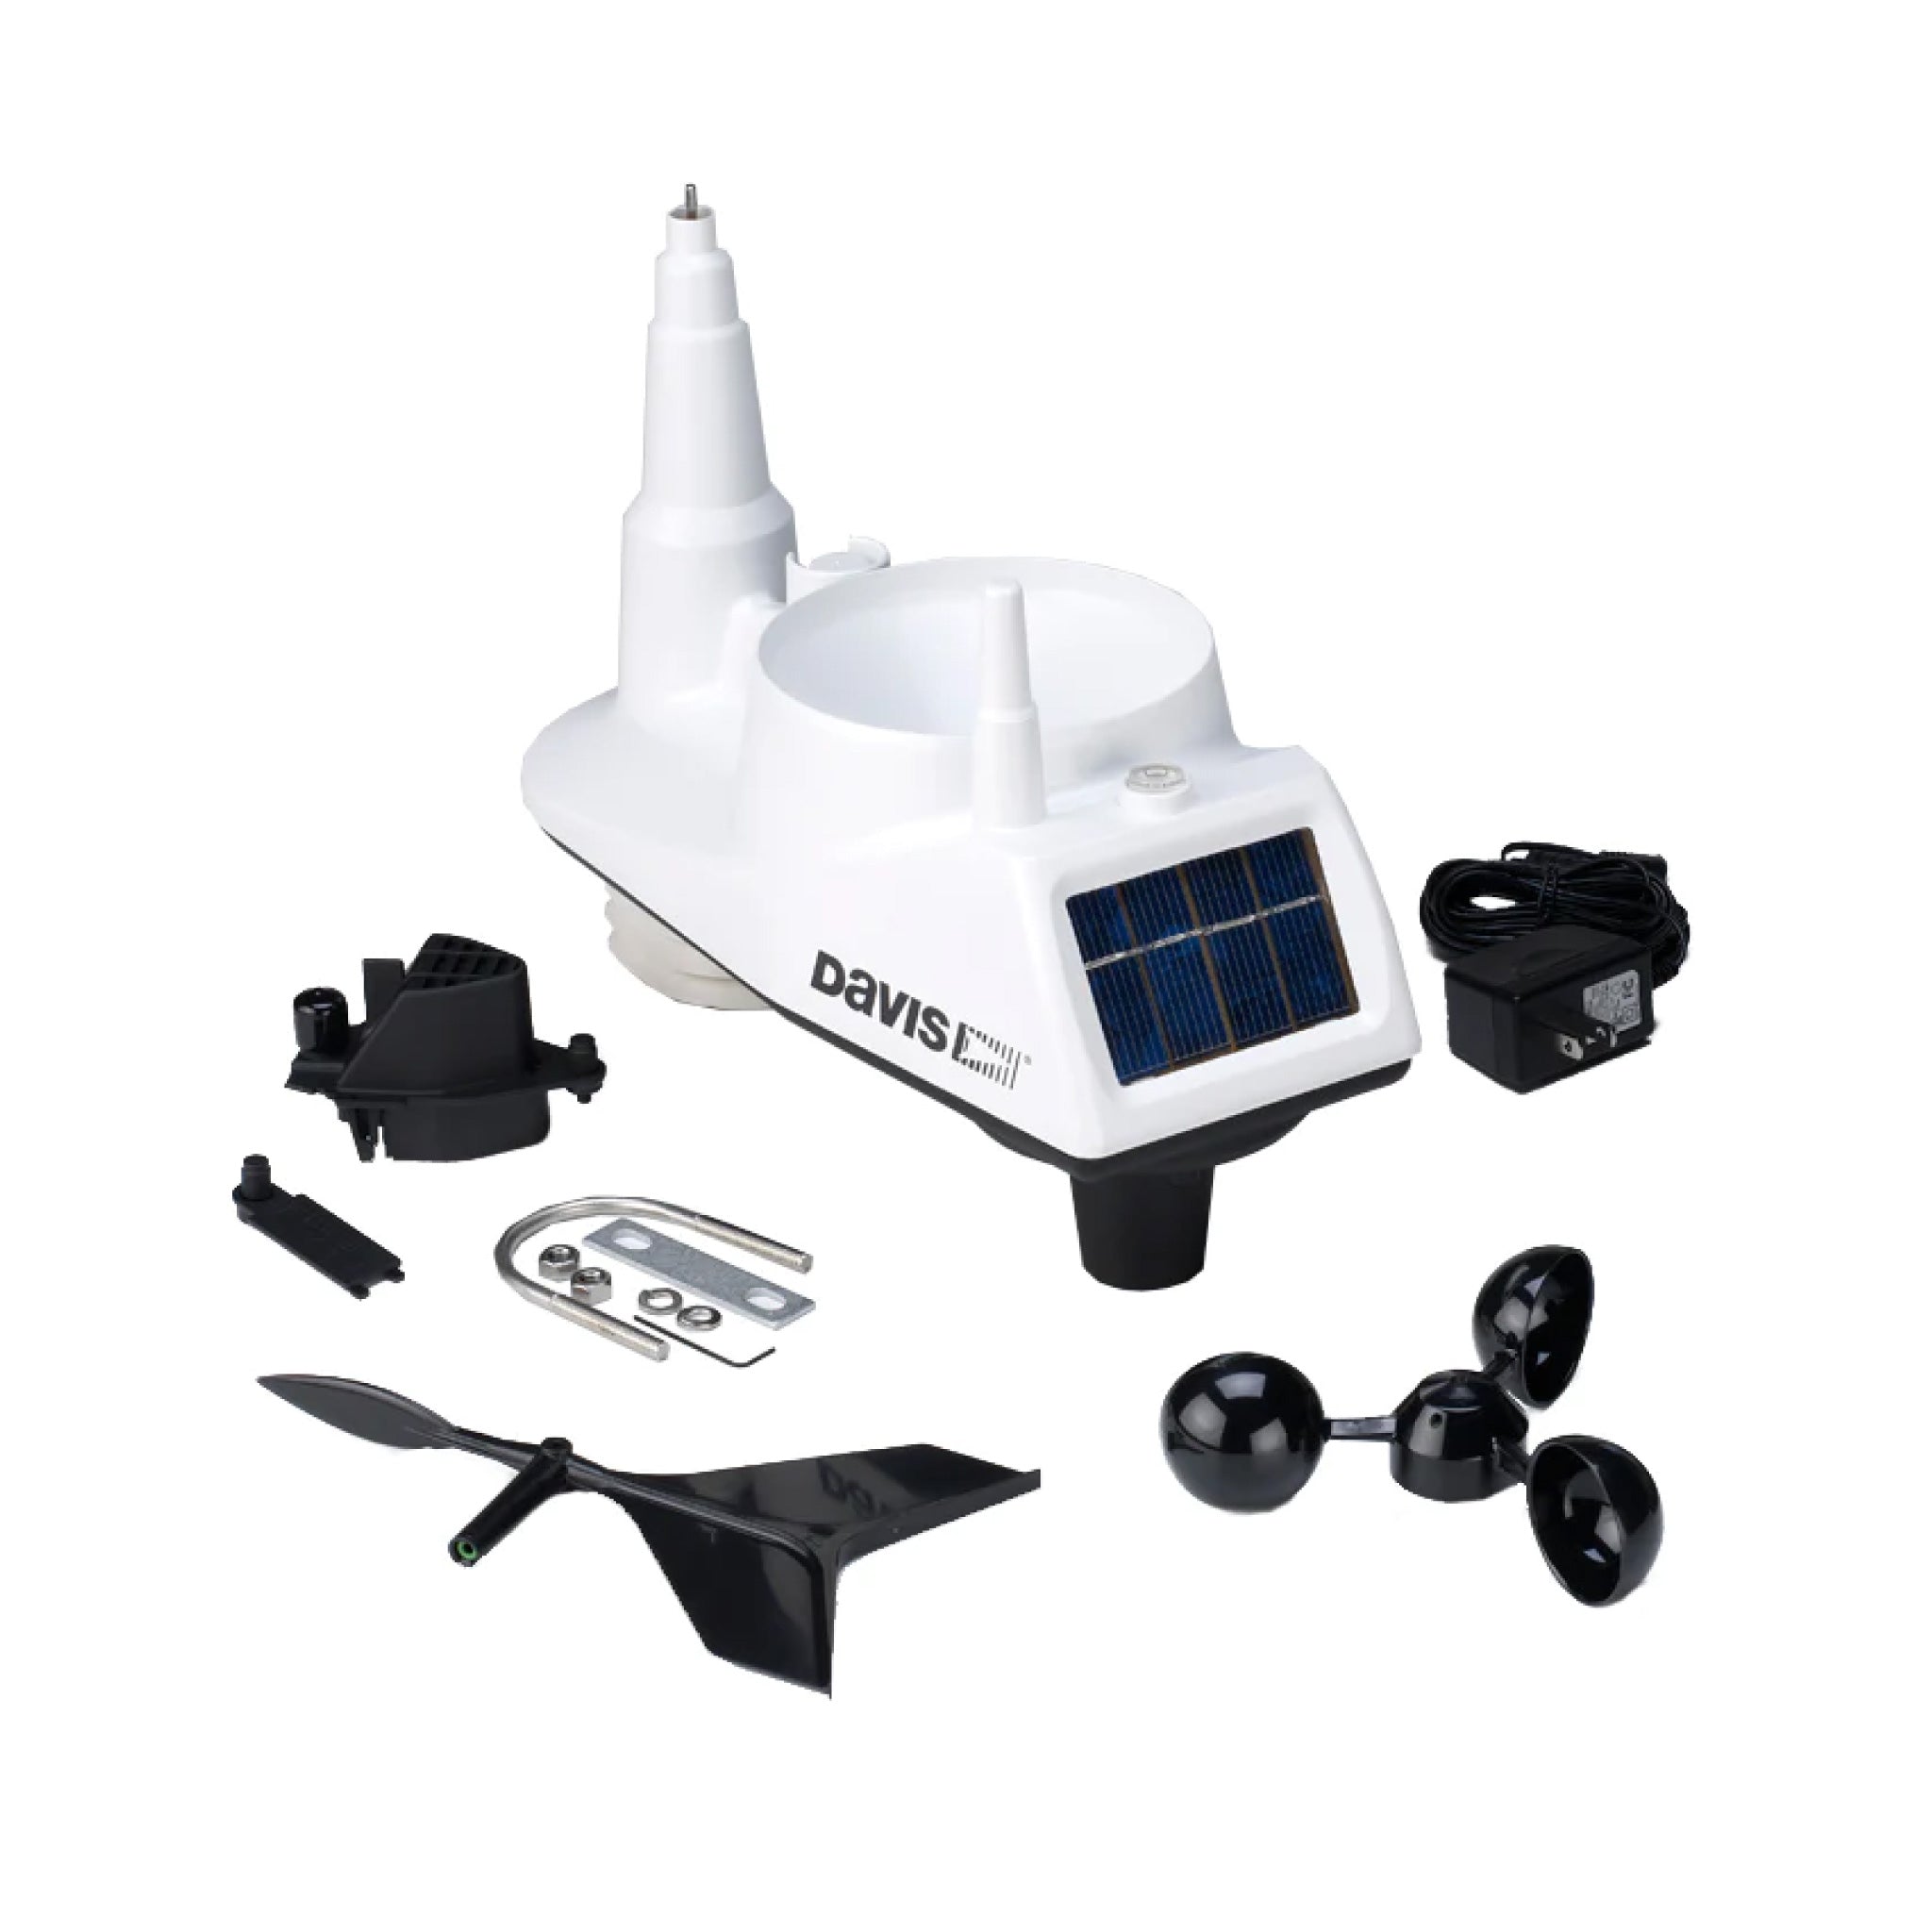 personal weather station components